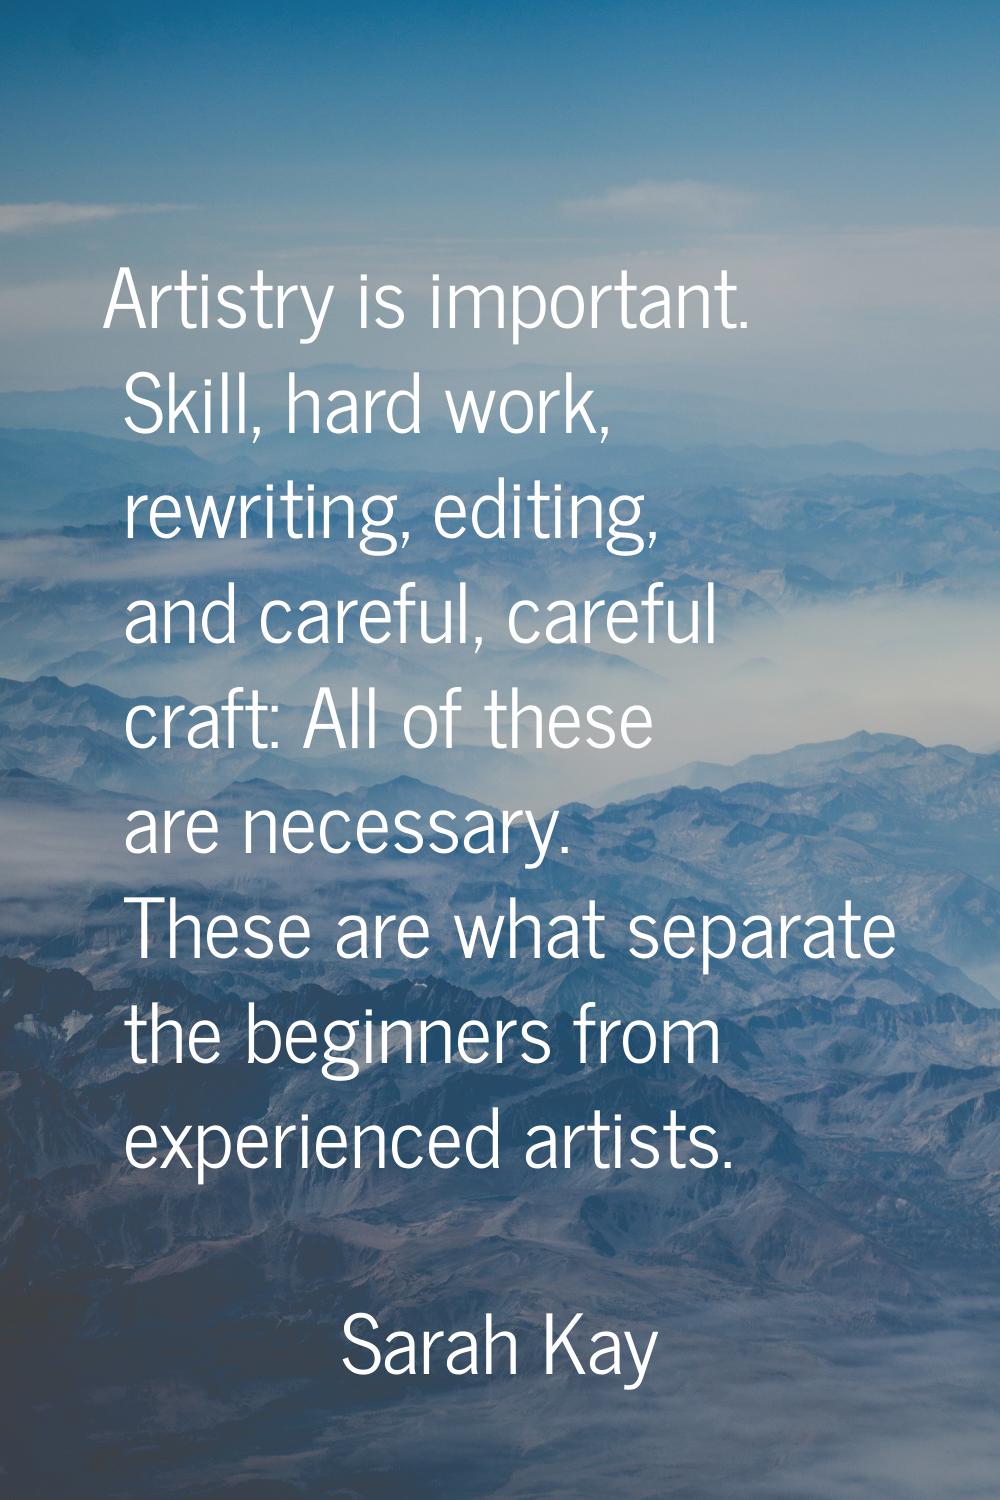 Artistry is important. Skill, hard work, rewriting, editing, and careful, careful craft: All of the